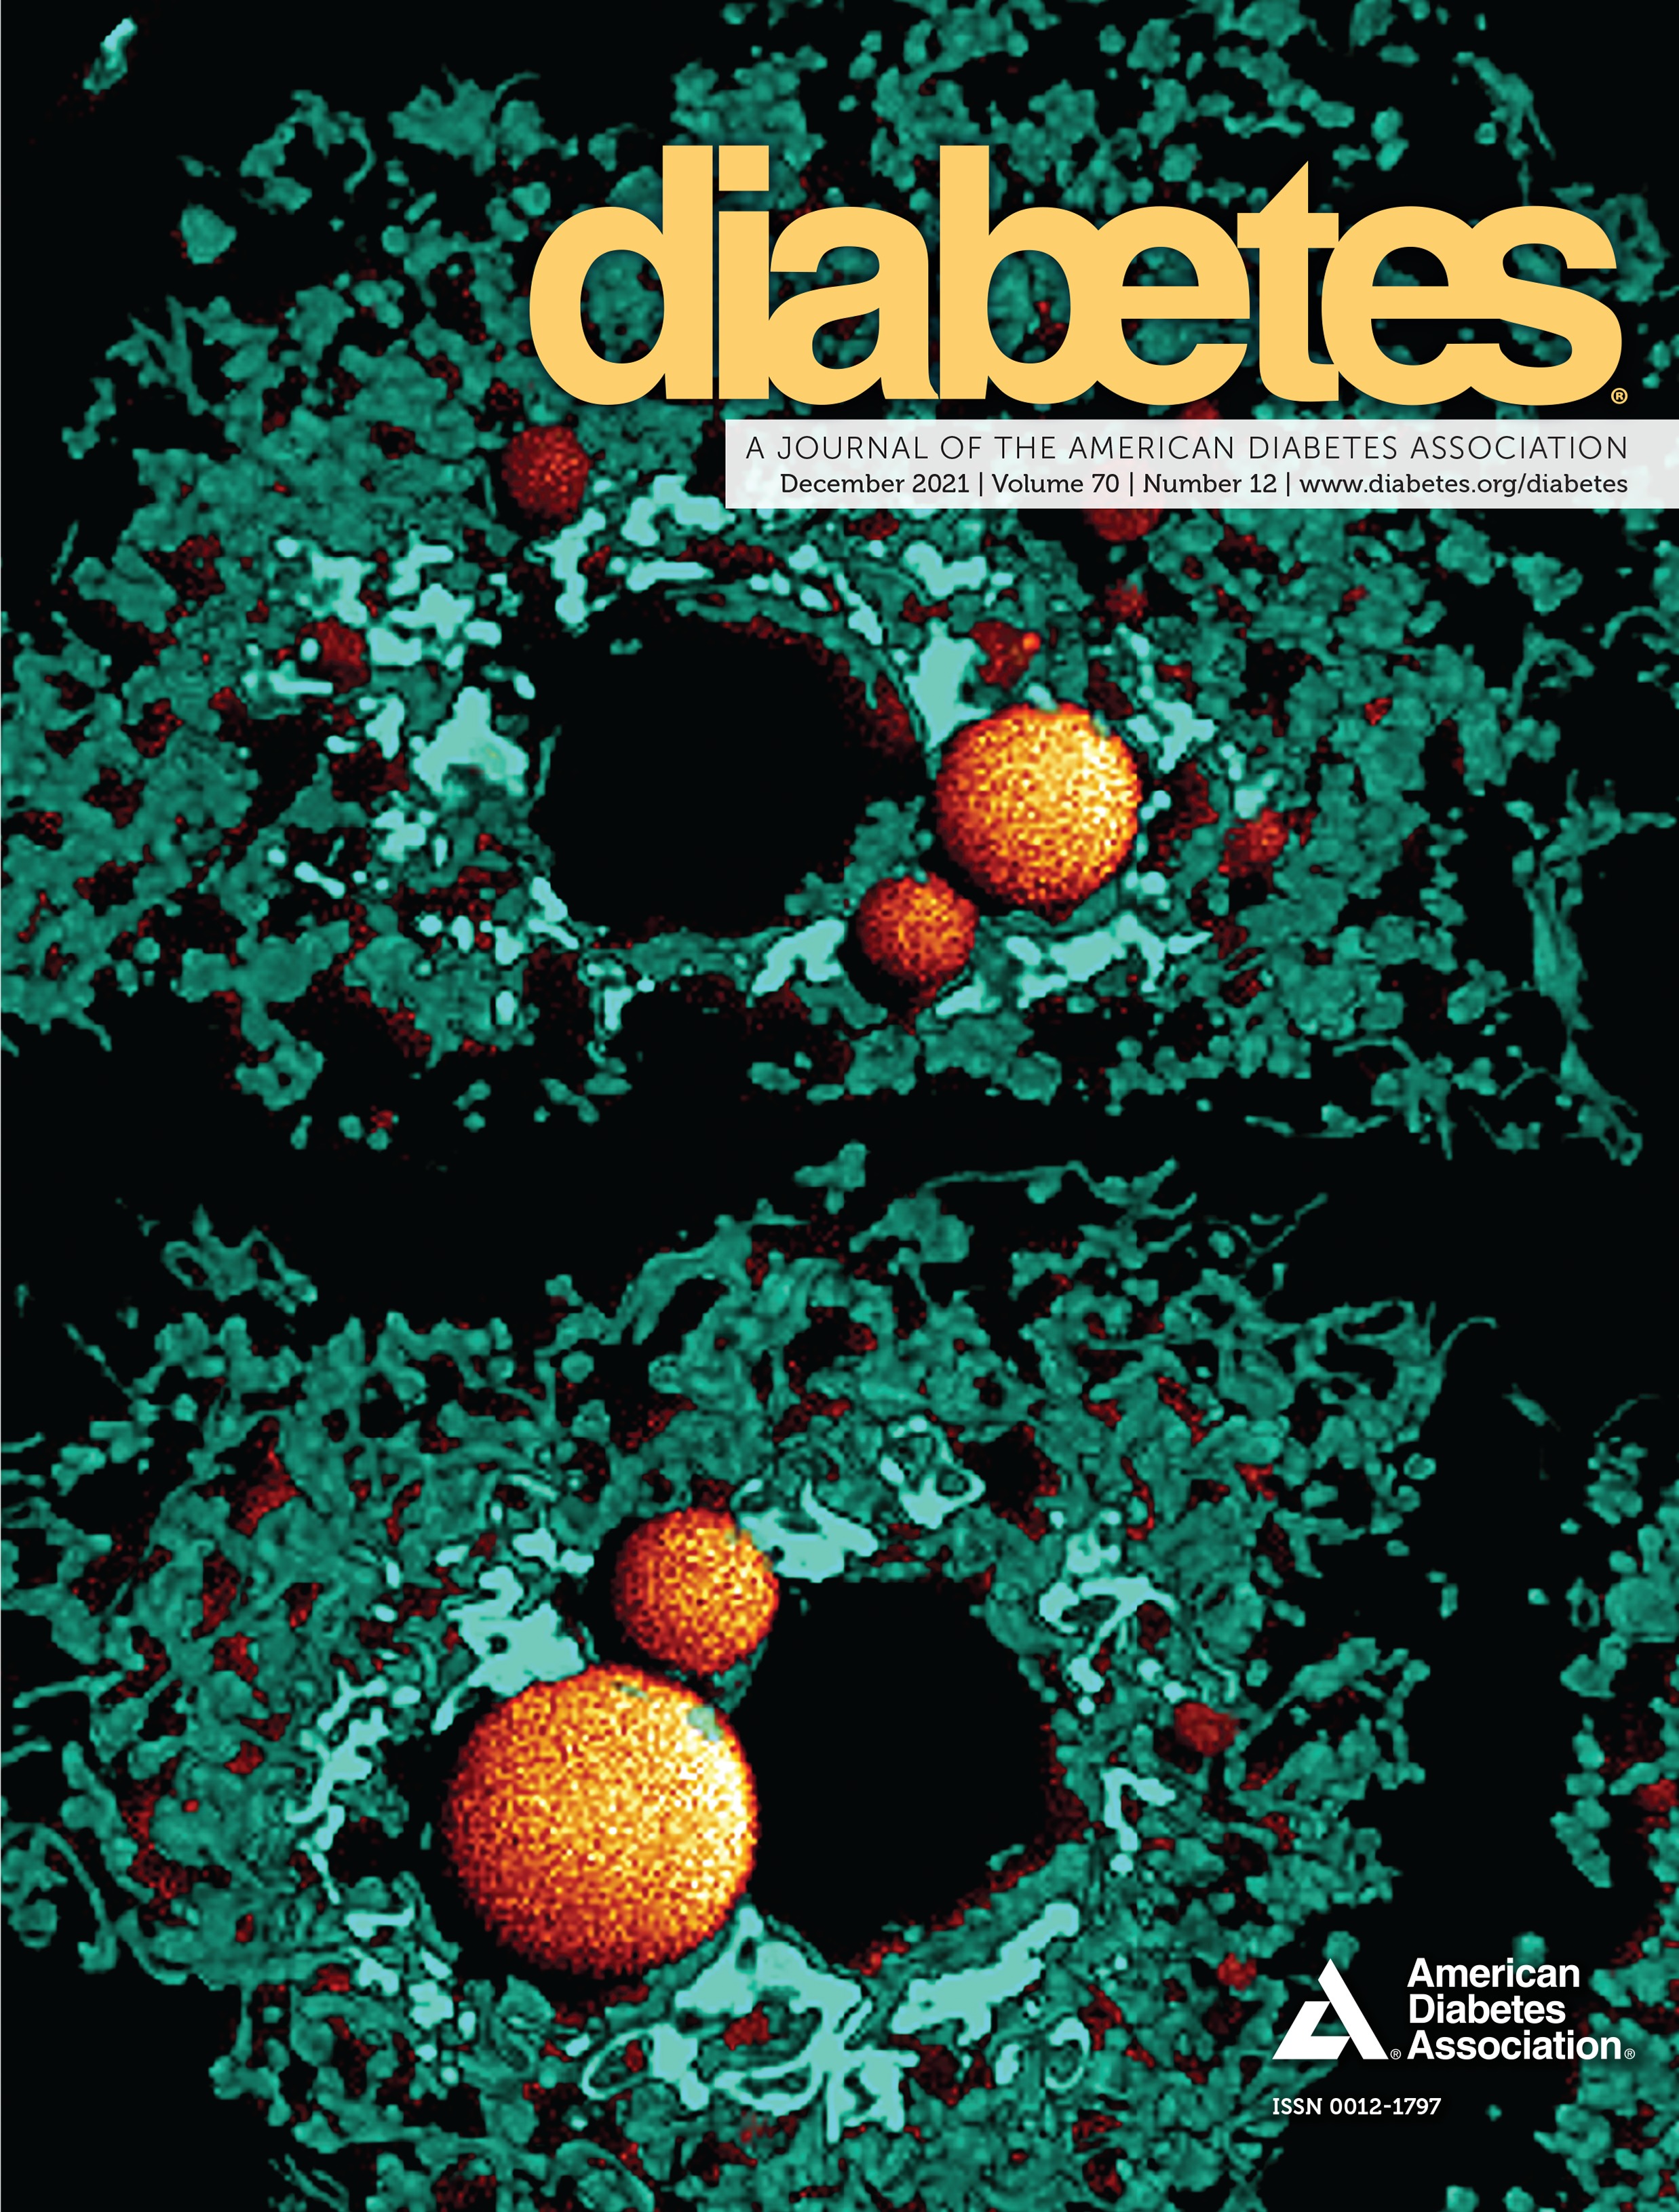 CD8+ T Cells Variably Recognize Native Versus Citrullinated GRP78 Epitopes in Type 1 Diabetes